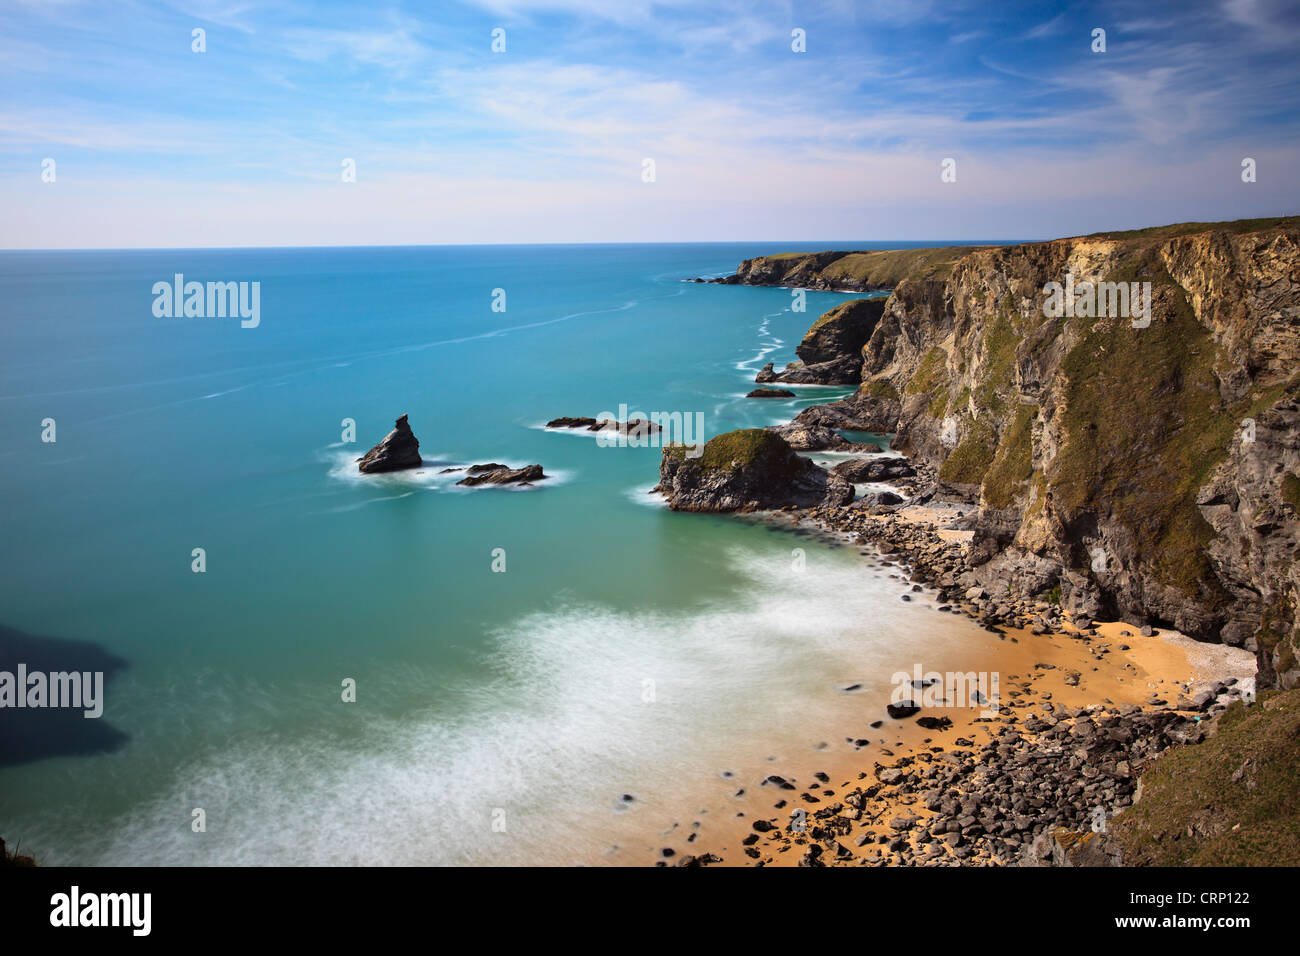 Rugged Cornish coastline at Bedruthan Steps named after a mythological giant 'Bedruthan' who was said to have used rock stacks o Stock Photo